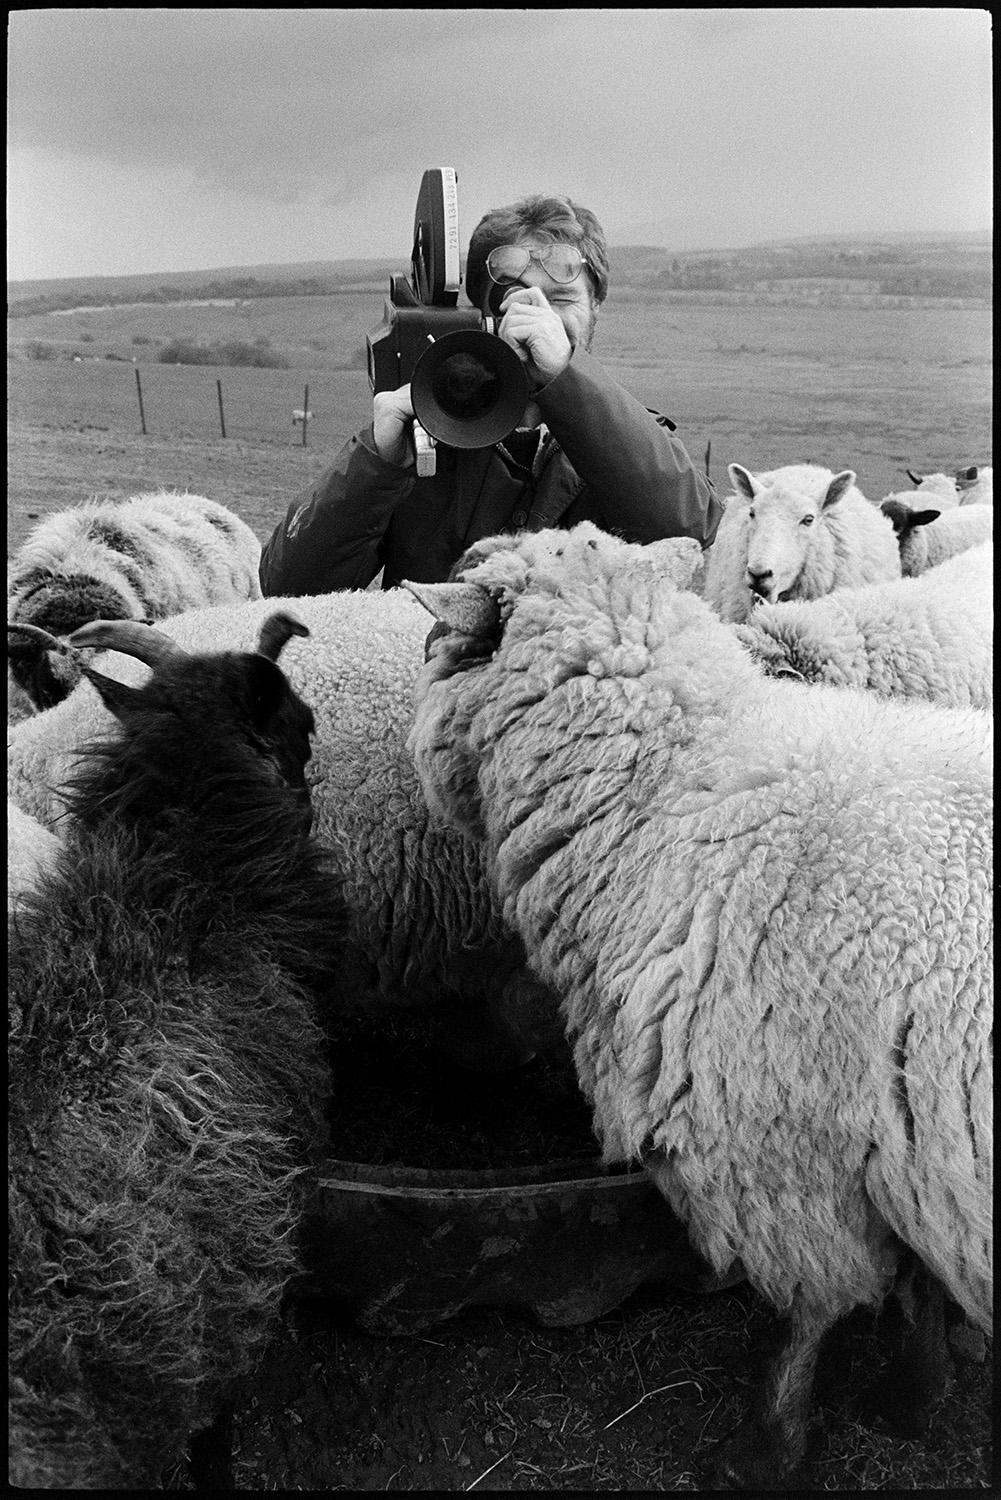 Television crew filming the photographer working on moor.
[Malcolm Baldwin filming sheep in a field at Hatherleigh Moor. Distant fields and hills are visible in the background.]